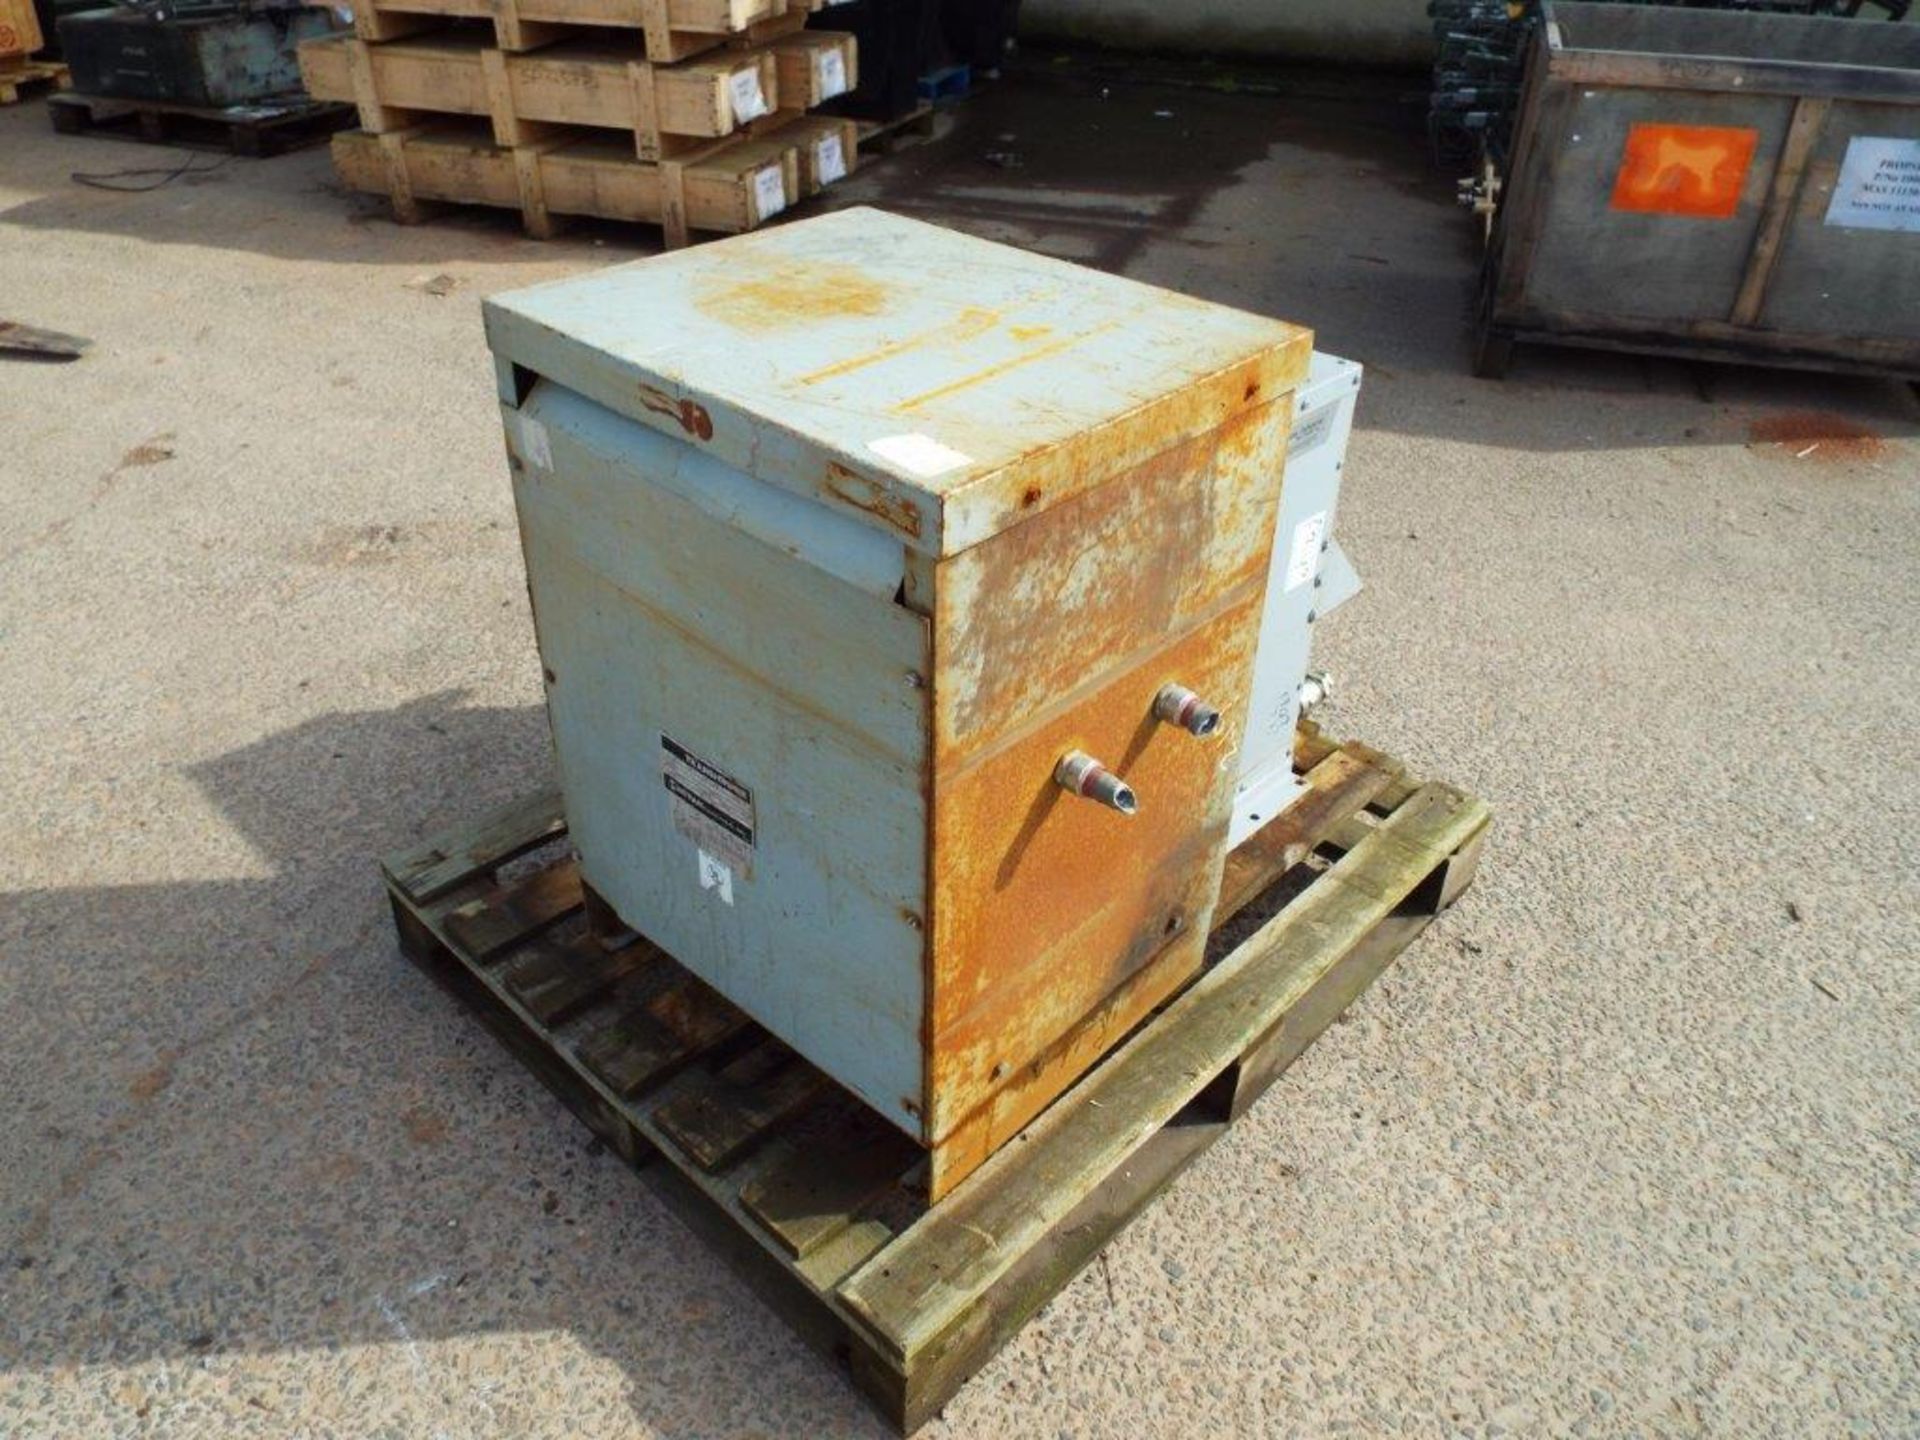 Hitran 27 KVA 460 Volt Delta to 460Y/266 D3002744H6 3 Phase Transformer with Cooling Unit - Image 2 of 10